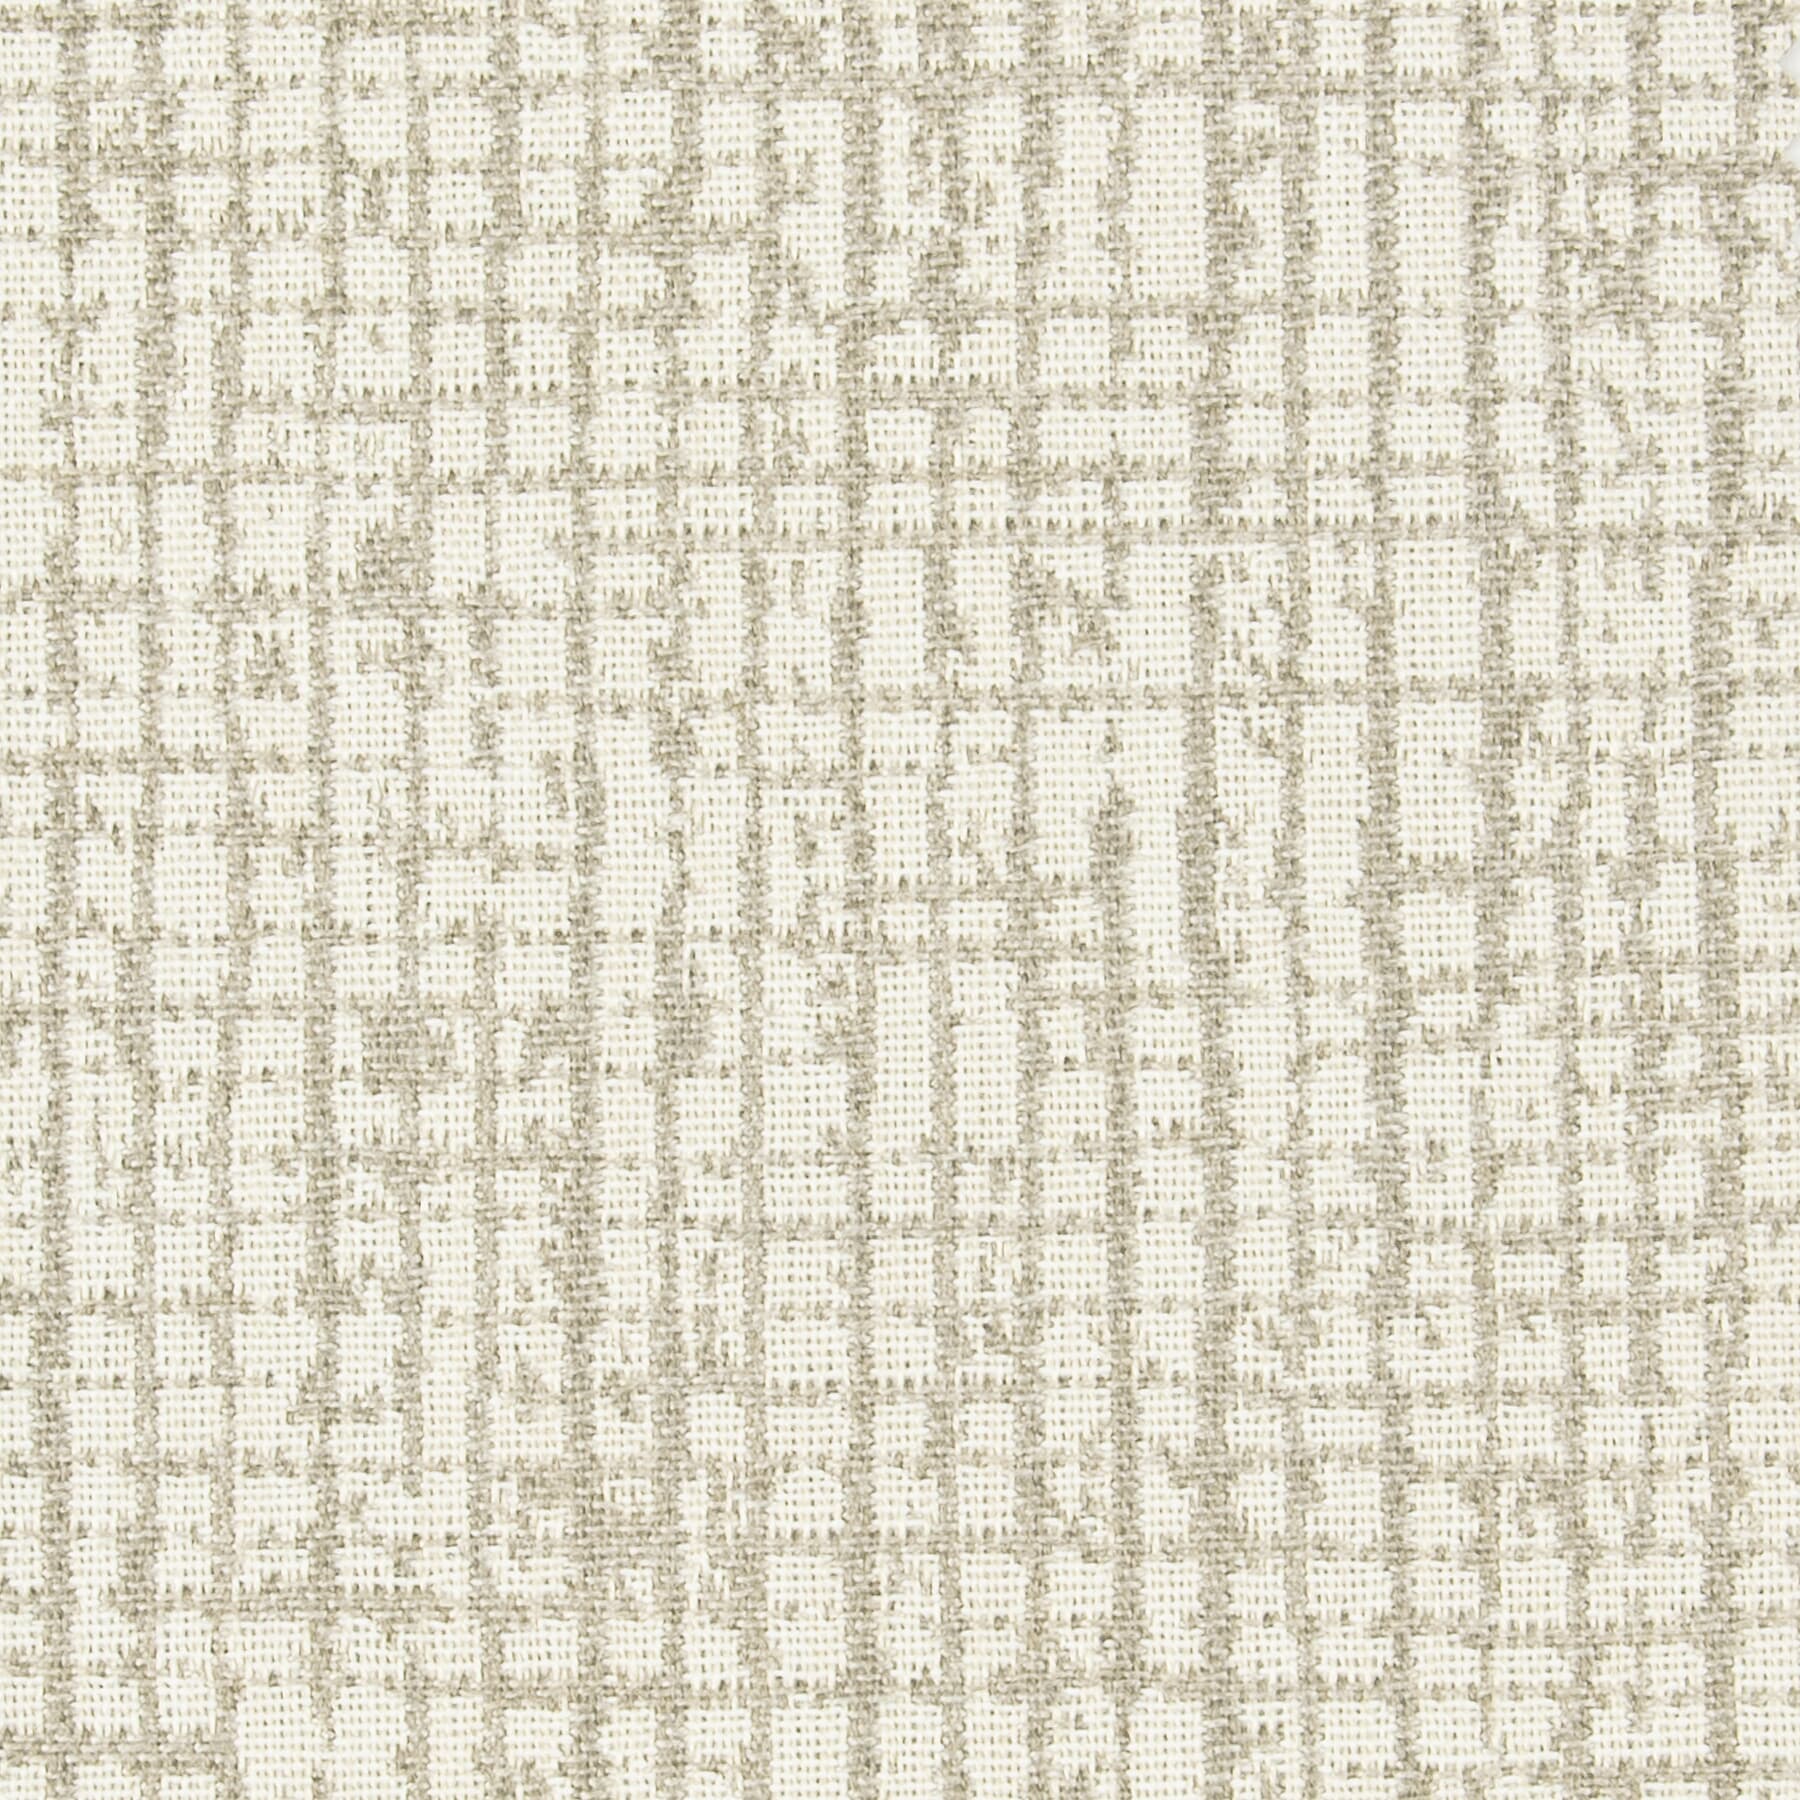 Lowell 2 Beige by Stout Fabric